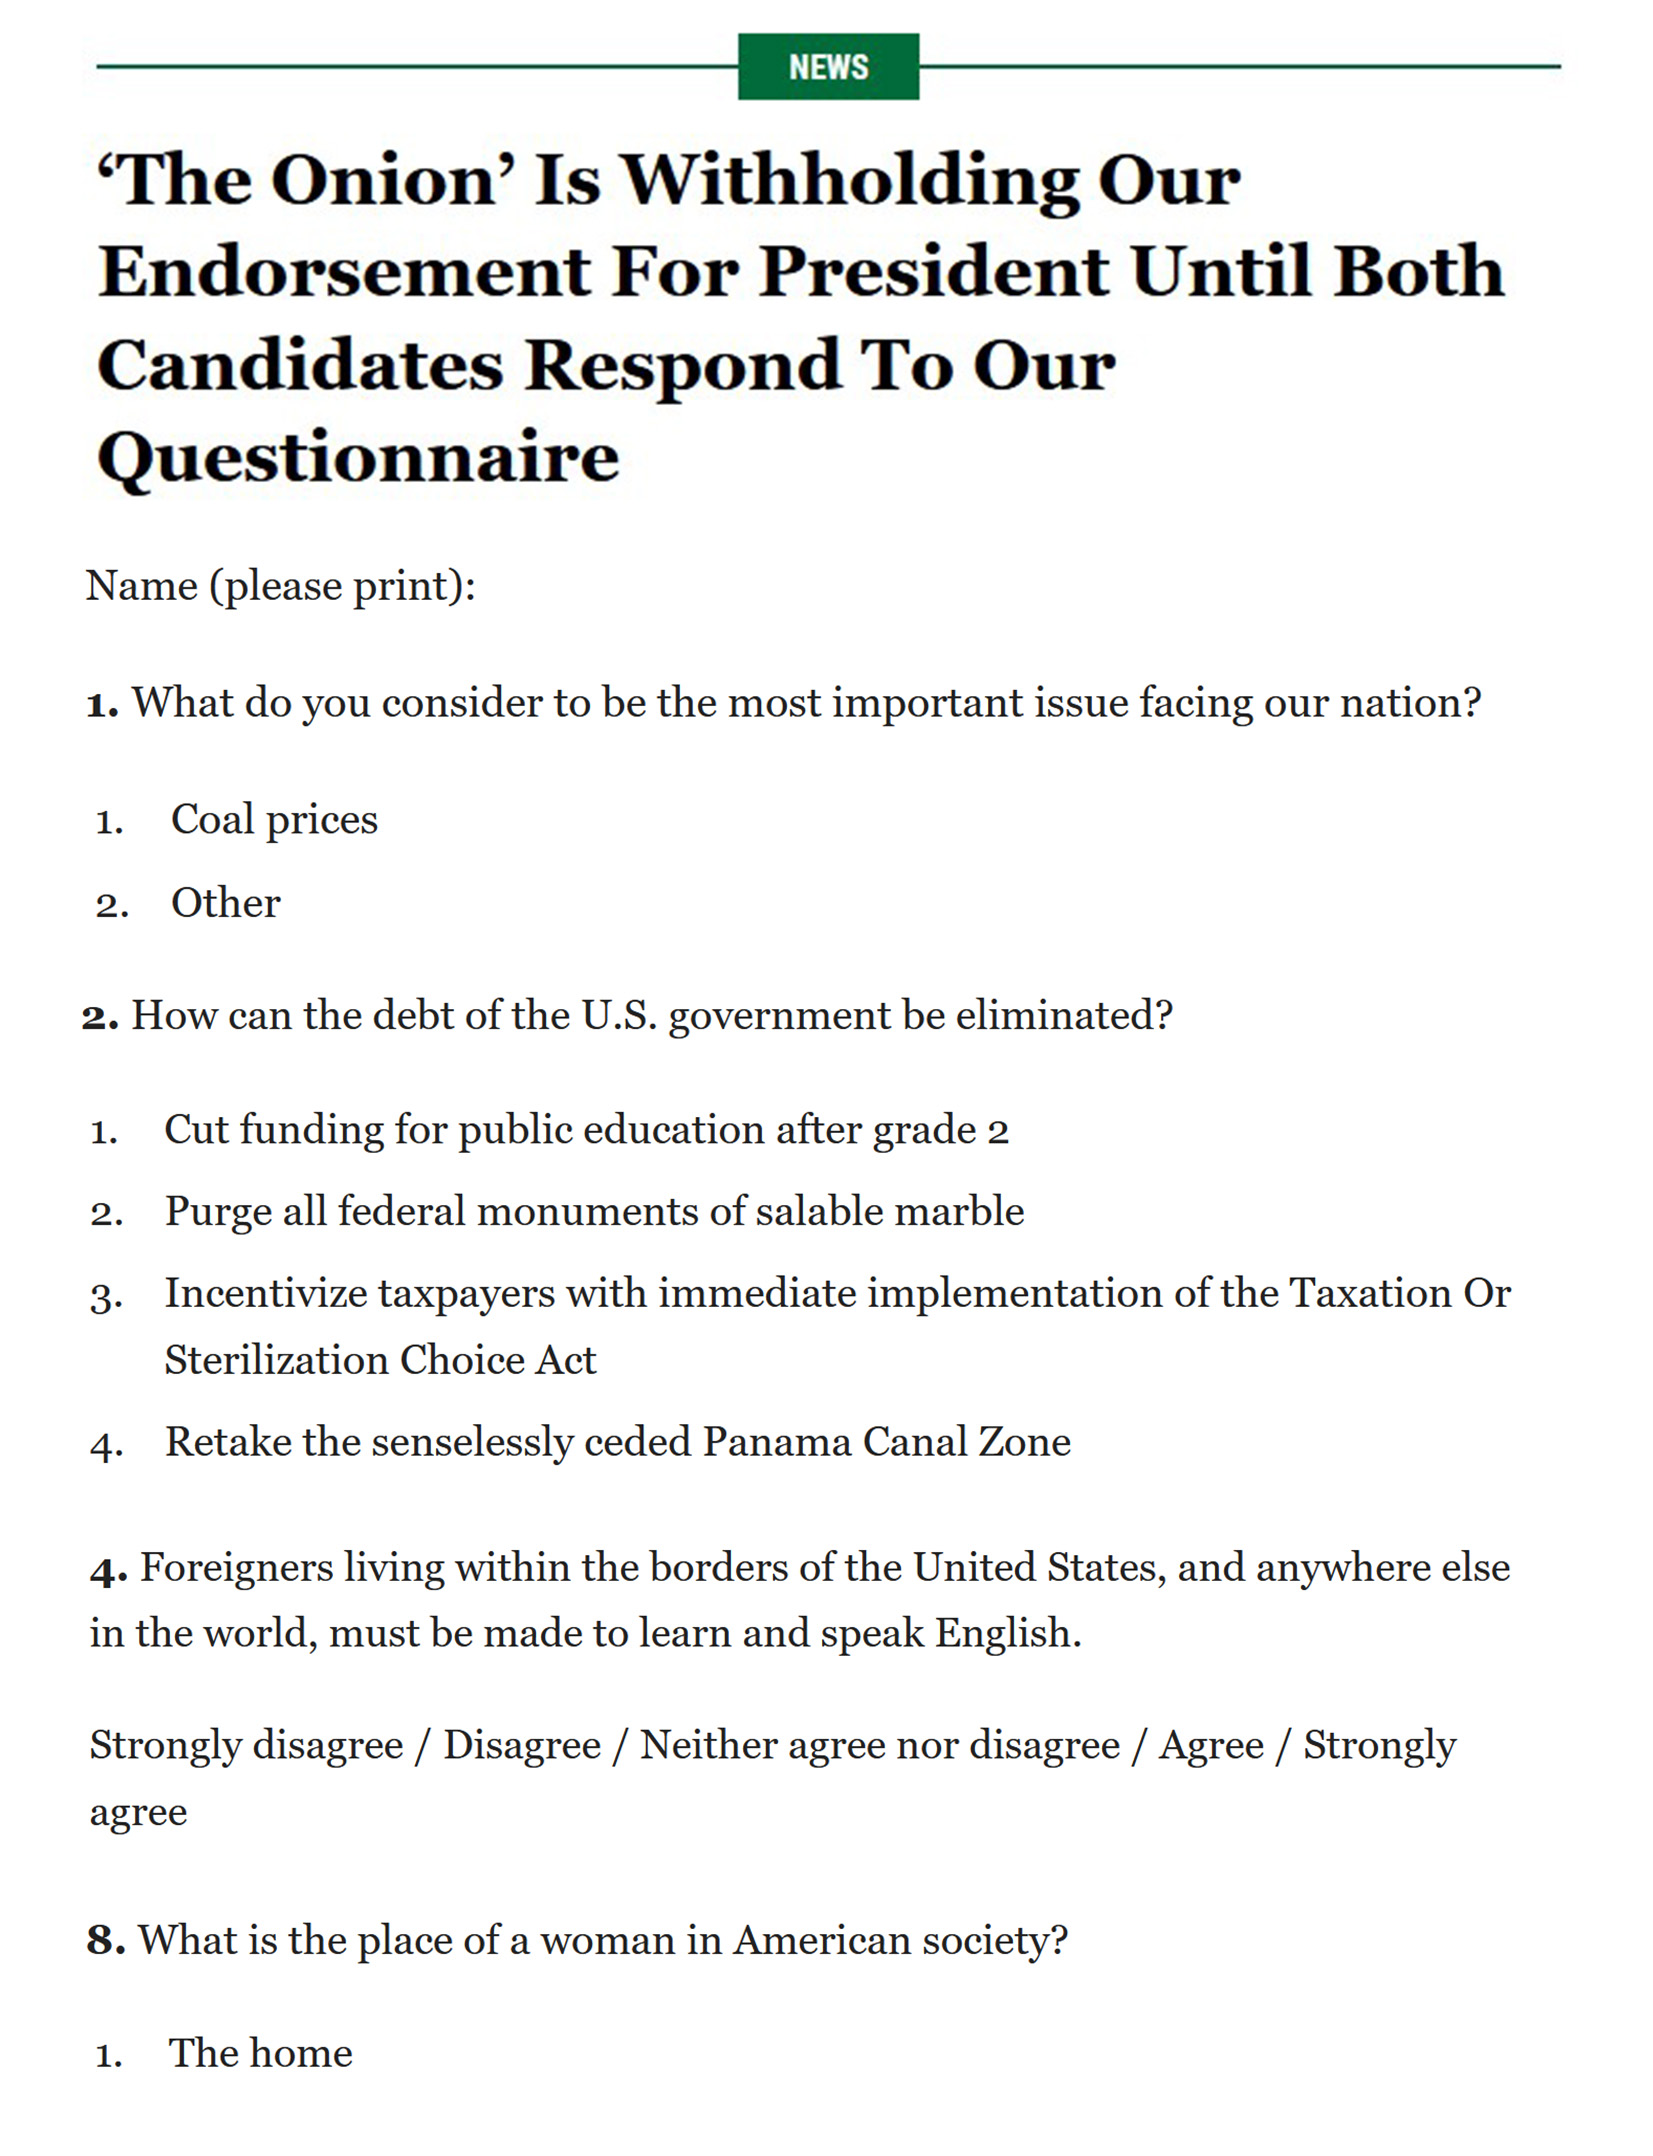 Four questions with response options, including Question 1 (“What do you consider to be the most important issue facing our nation?” Answers: “1. Coal prices,” “2. Other”) and Question 8 (“What is the place of a woman in American society?” Answer: “1. The home”).